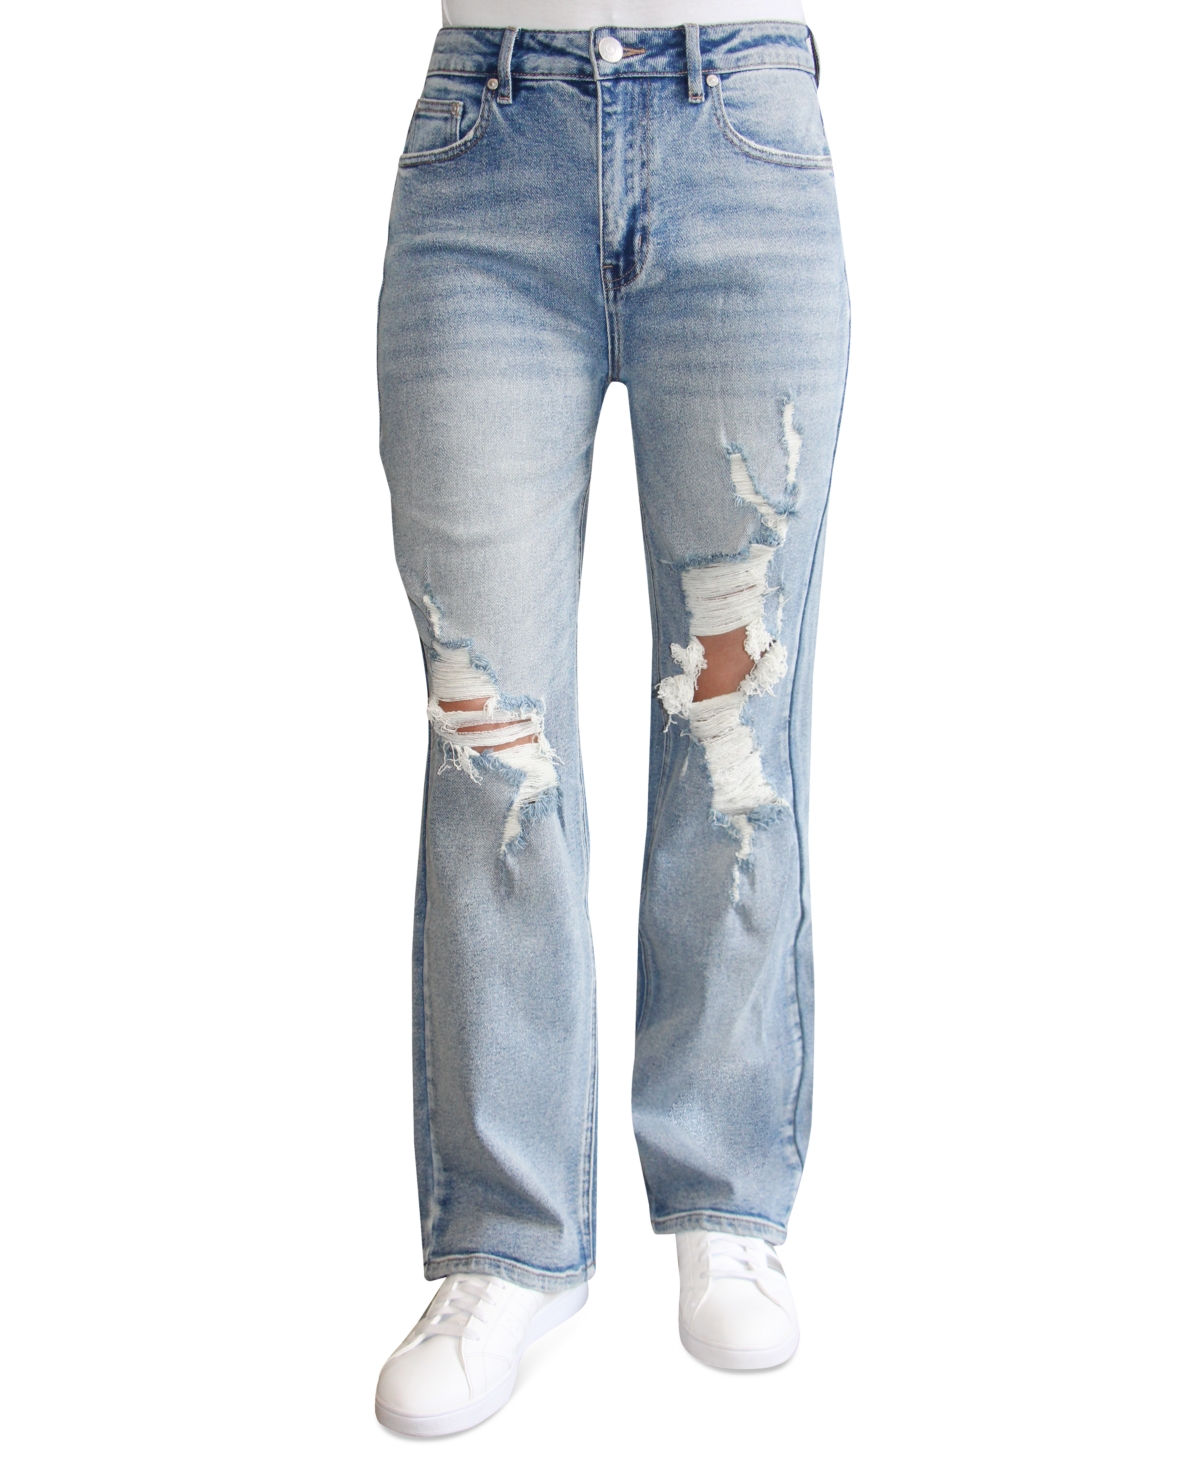 Juniors' High Waisted Distressed Wide-Leg Jeans - Light Wash